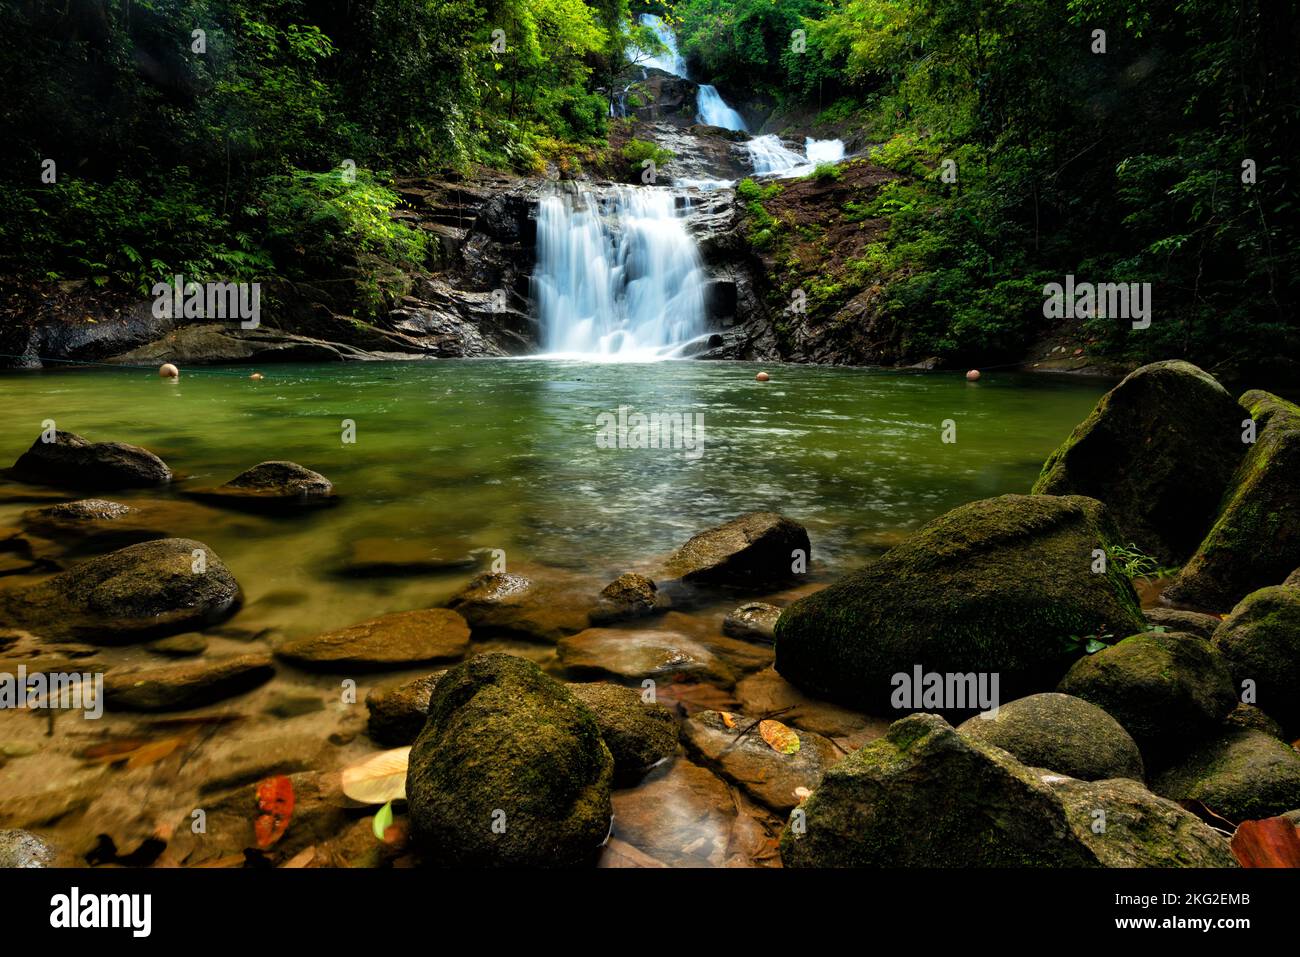 Scene of beautiful water flowing at Lampi waterfall at Phang-gna province, Thailand. Stock Photo